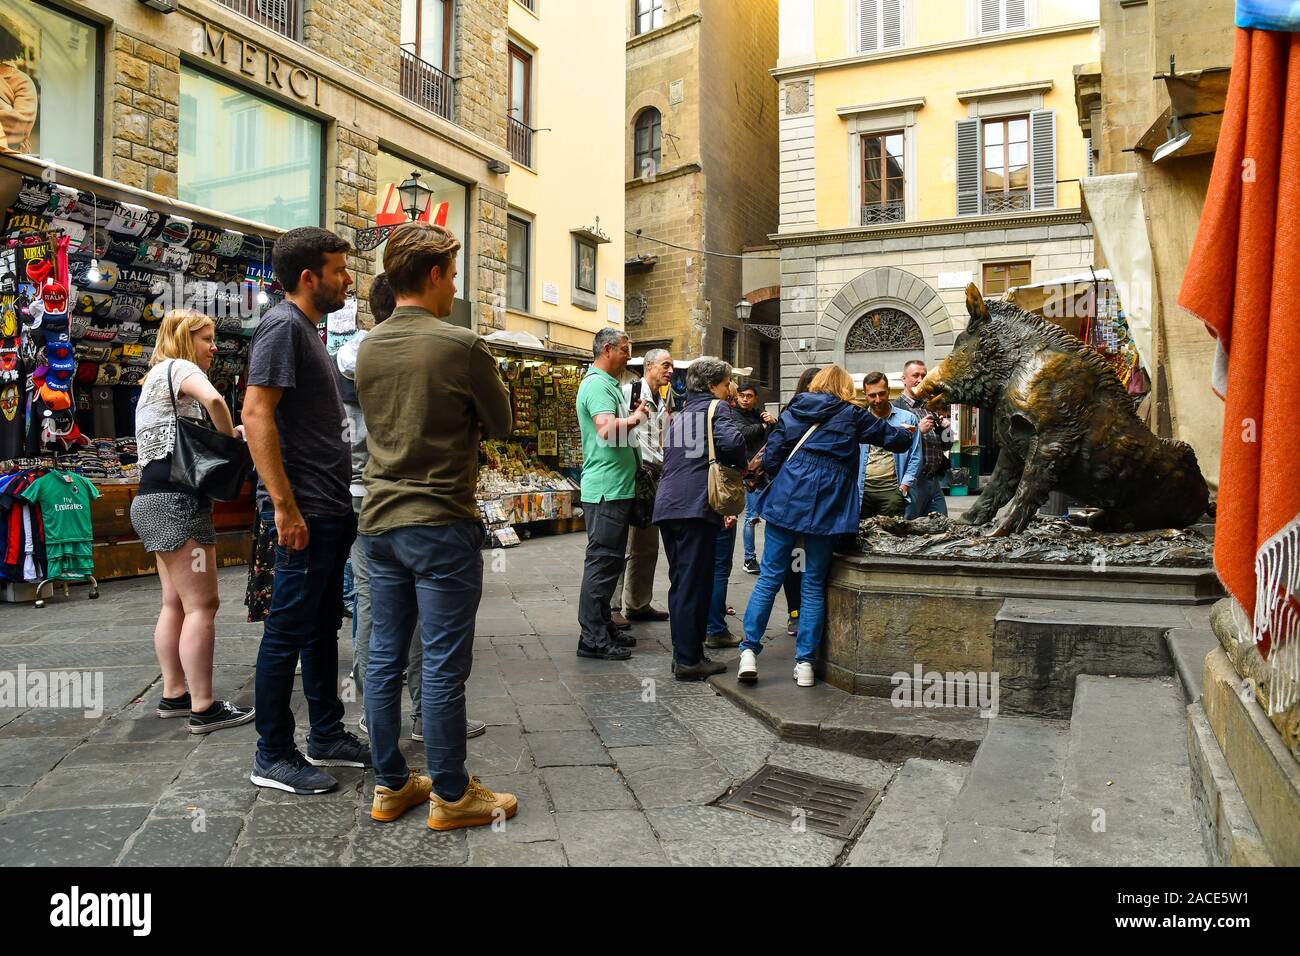 Group of tourists admiring the famous Fontana del Porcellino in the historic centre of Florence, Unesco World Heritage Site, Tuscany, Italy Stock Photo